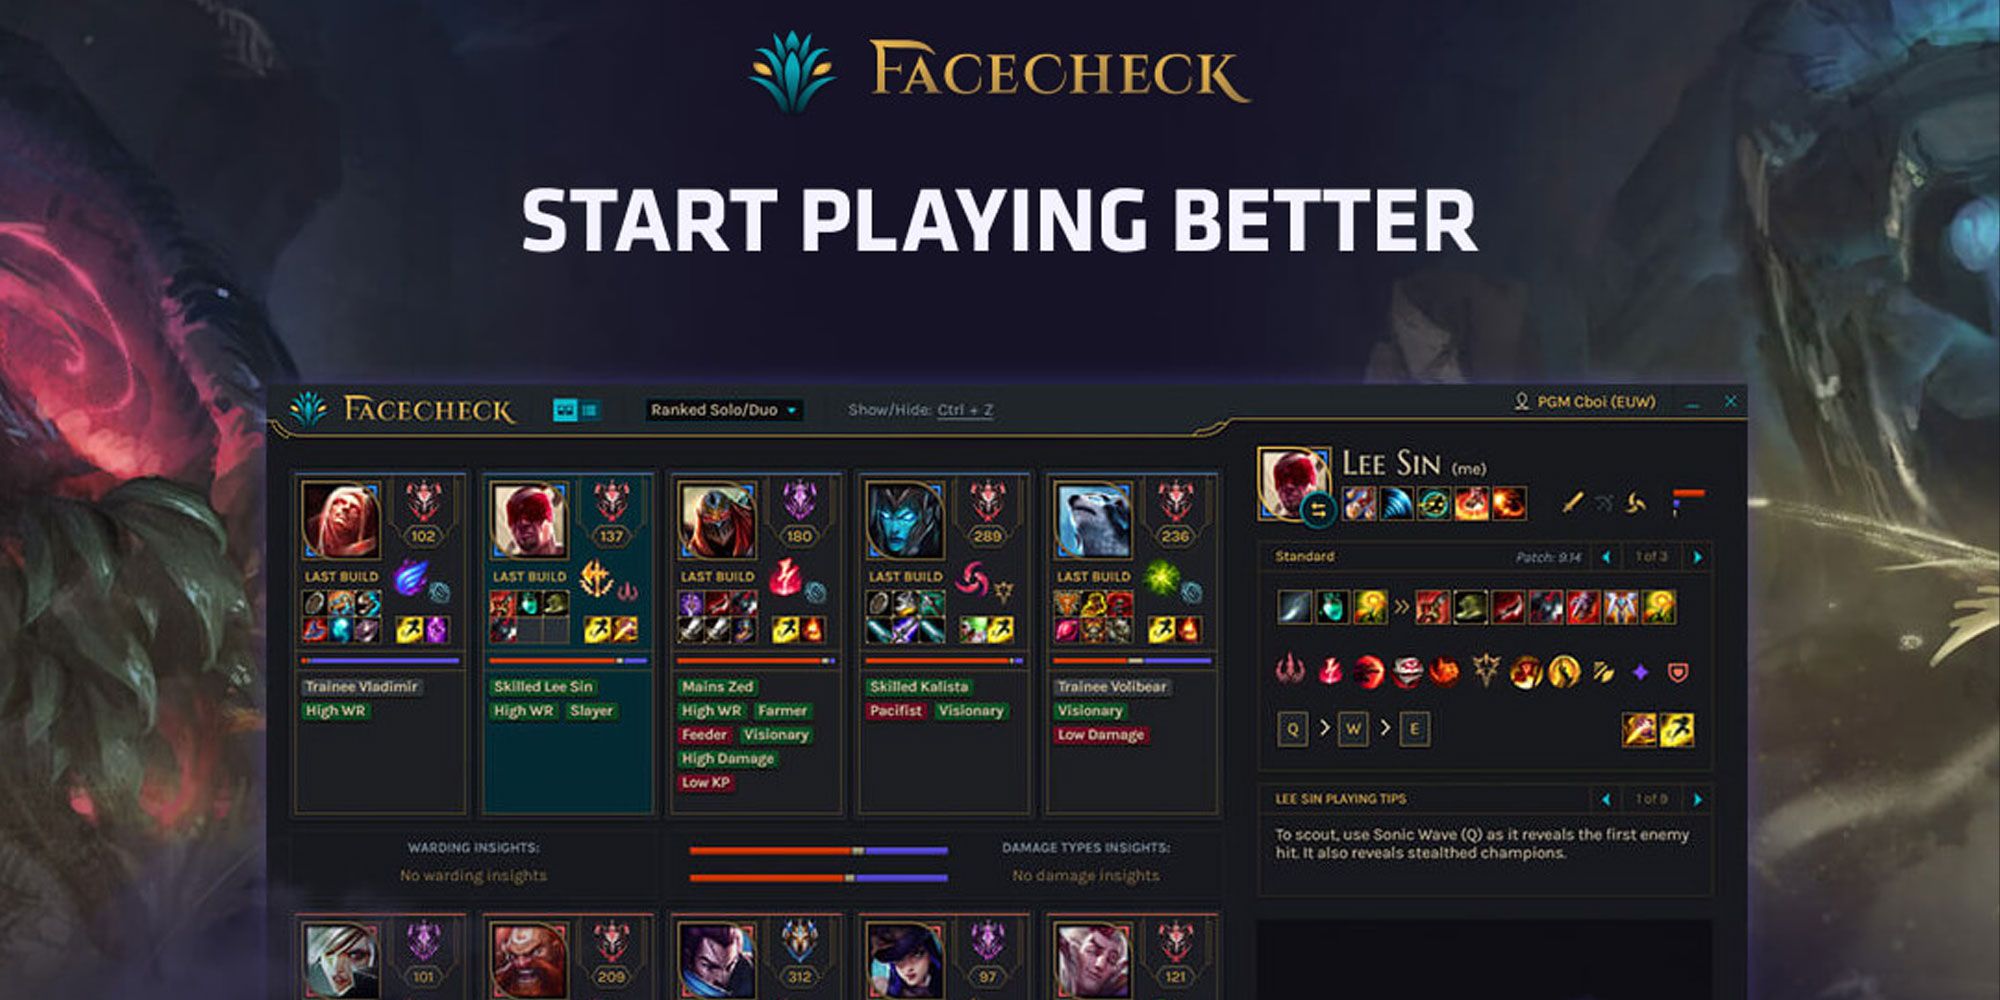 Image of League of Legends companion app Facecheck showing a screenshot of the app and text that says START PLAYING BETTER.